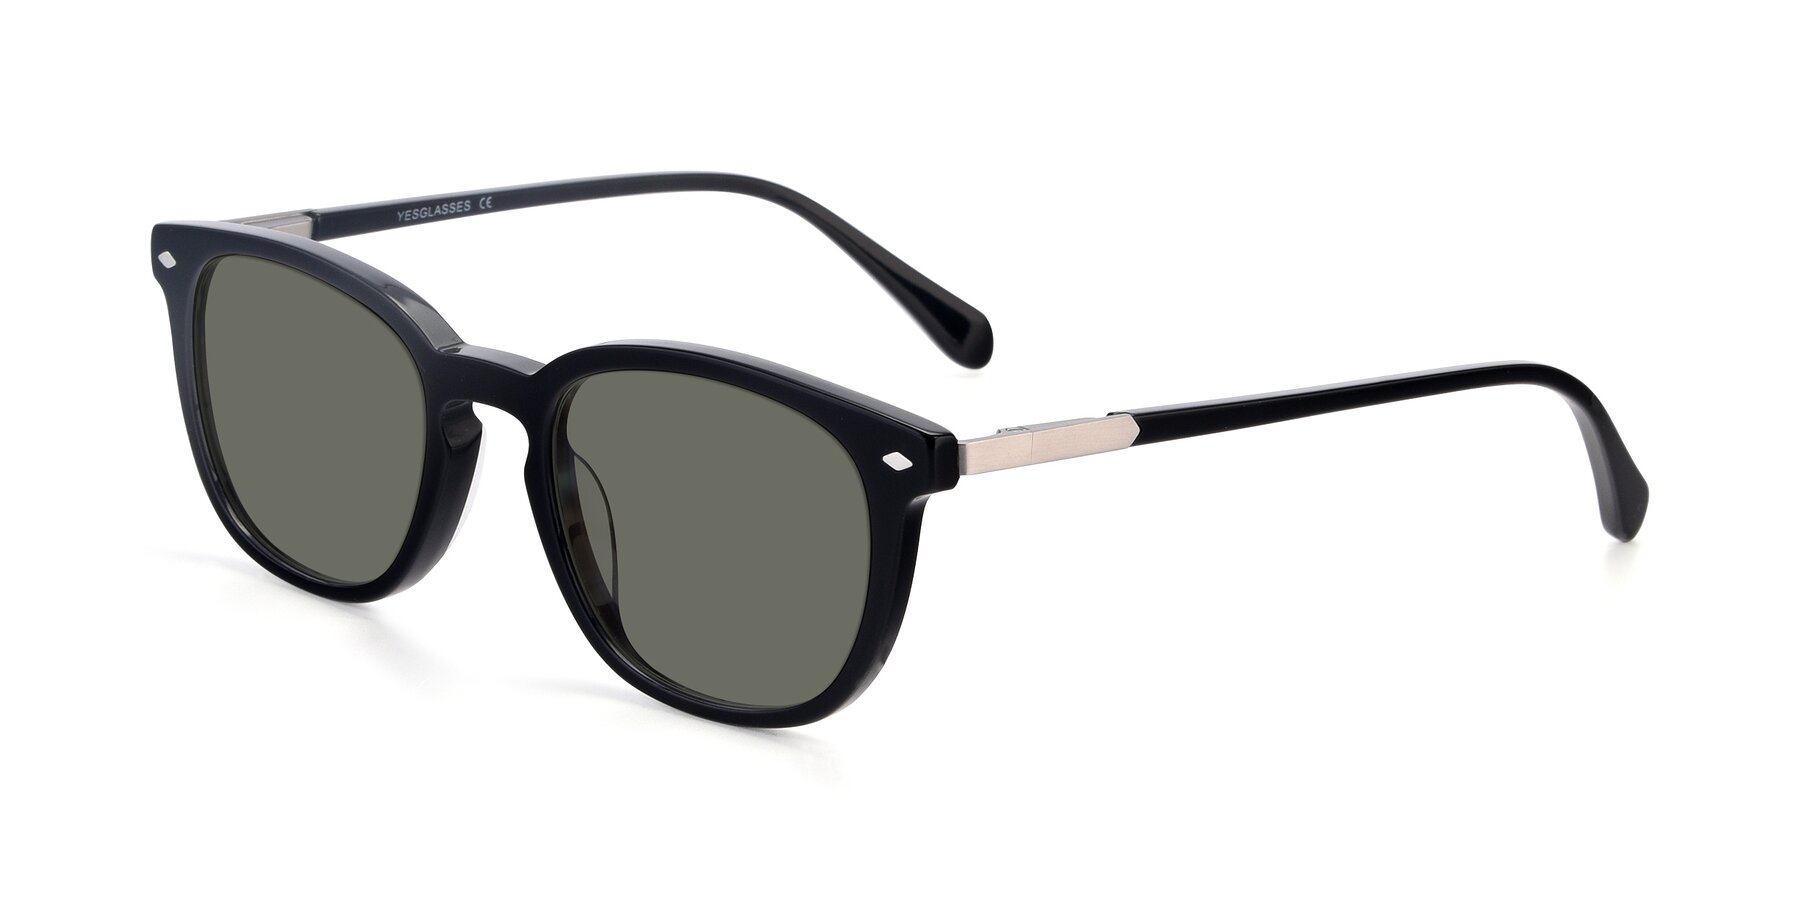 Angle of 17578 in Black with Gray Polarized Lenses